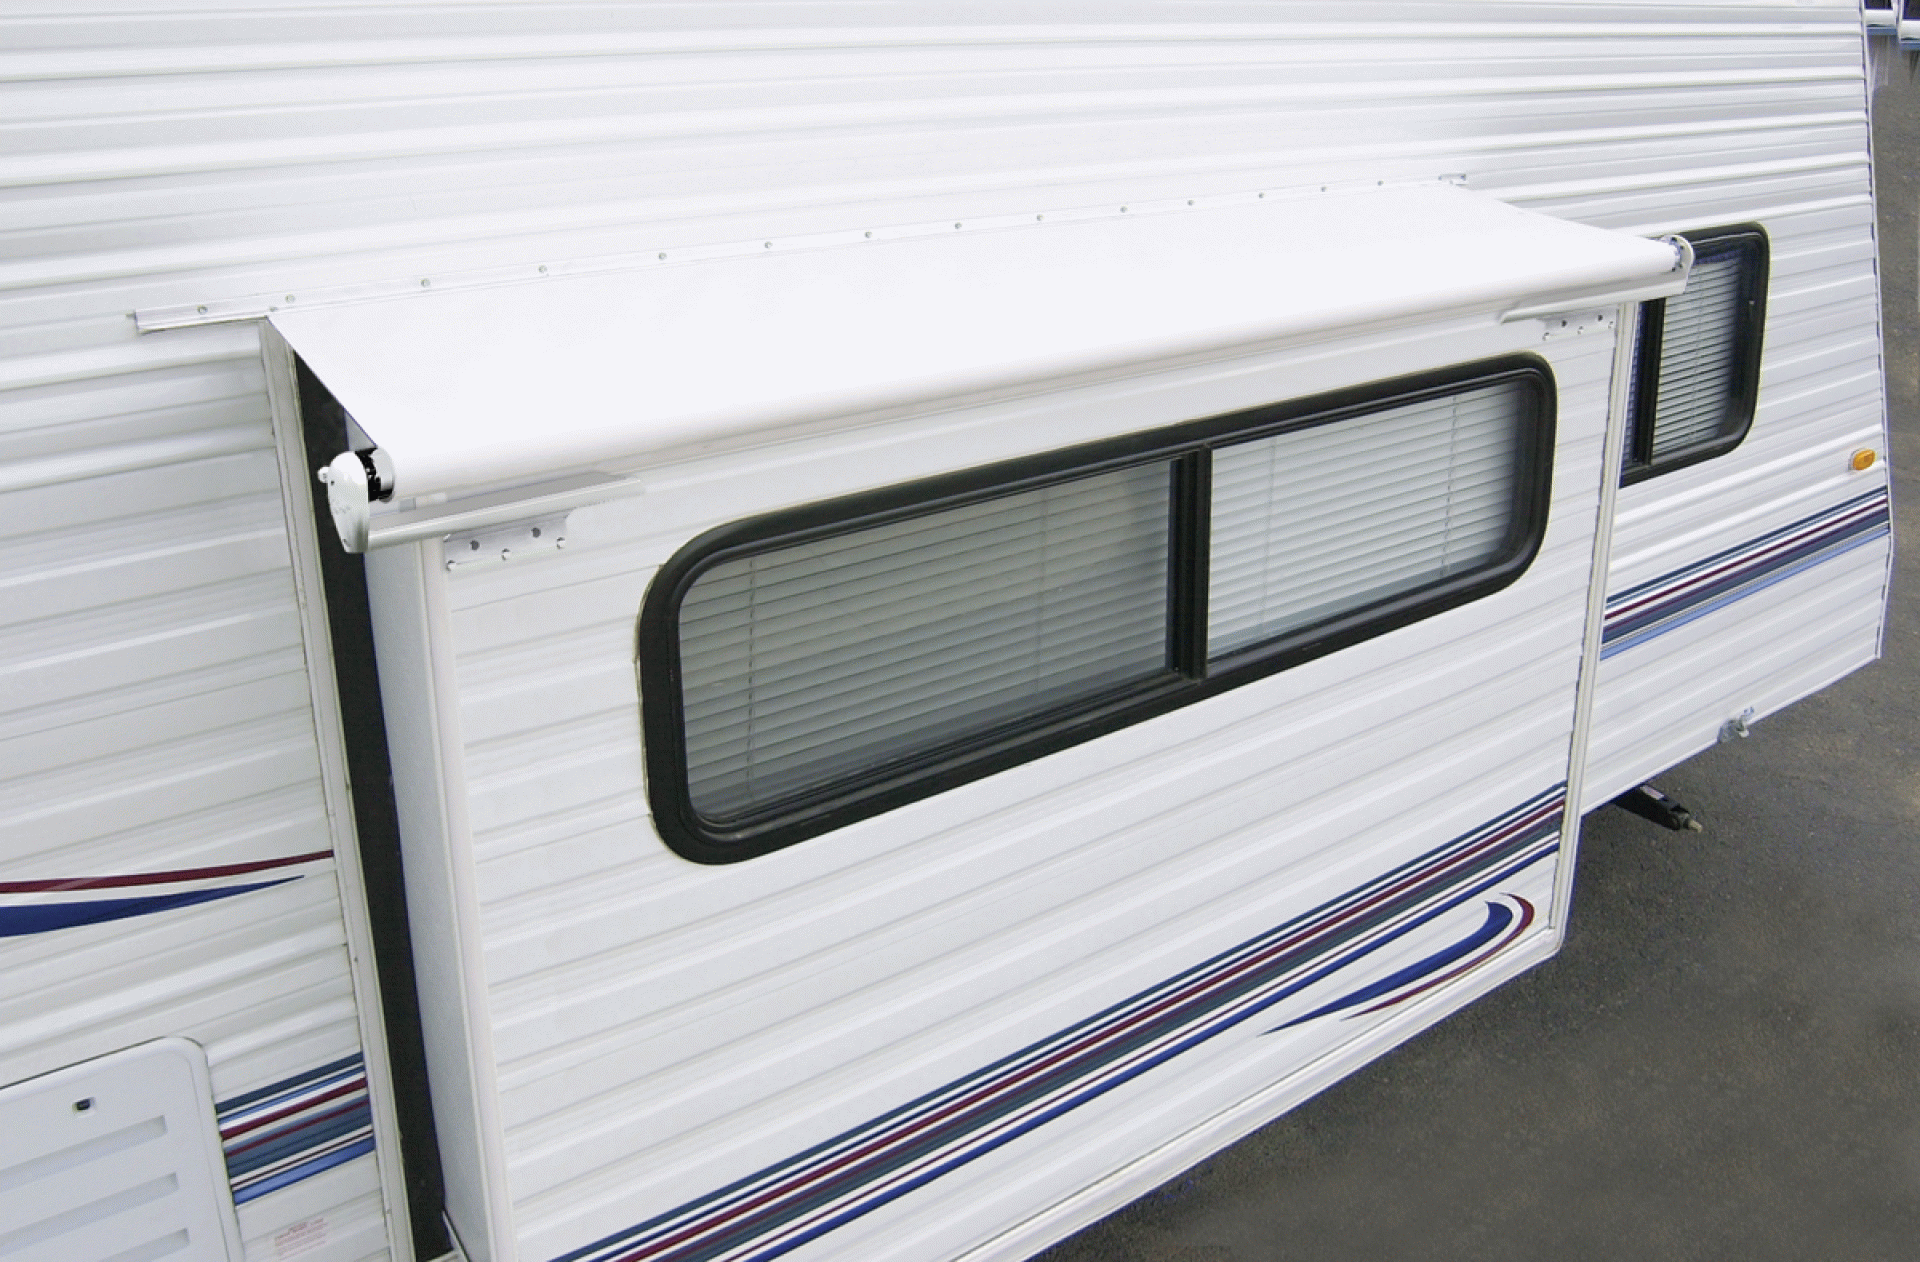 CAREFREE OF COLORADO | LH1616242 | Slideout Cover Awning 154" - 161.9" Roof Range Solid Black Vinyl